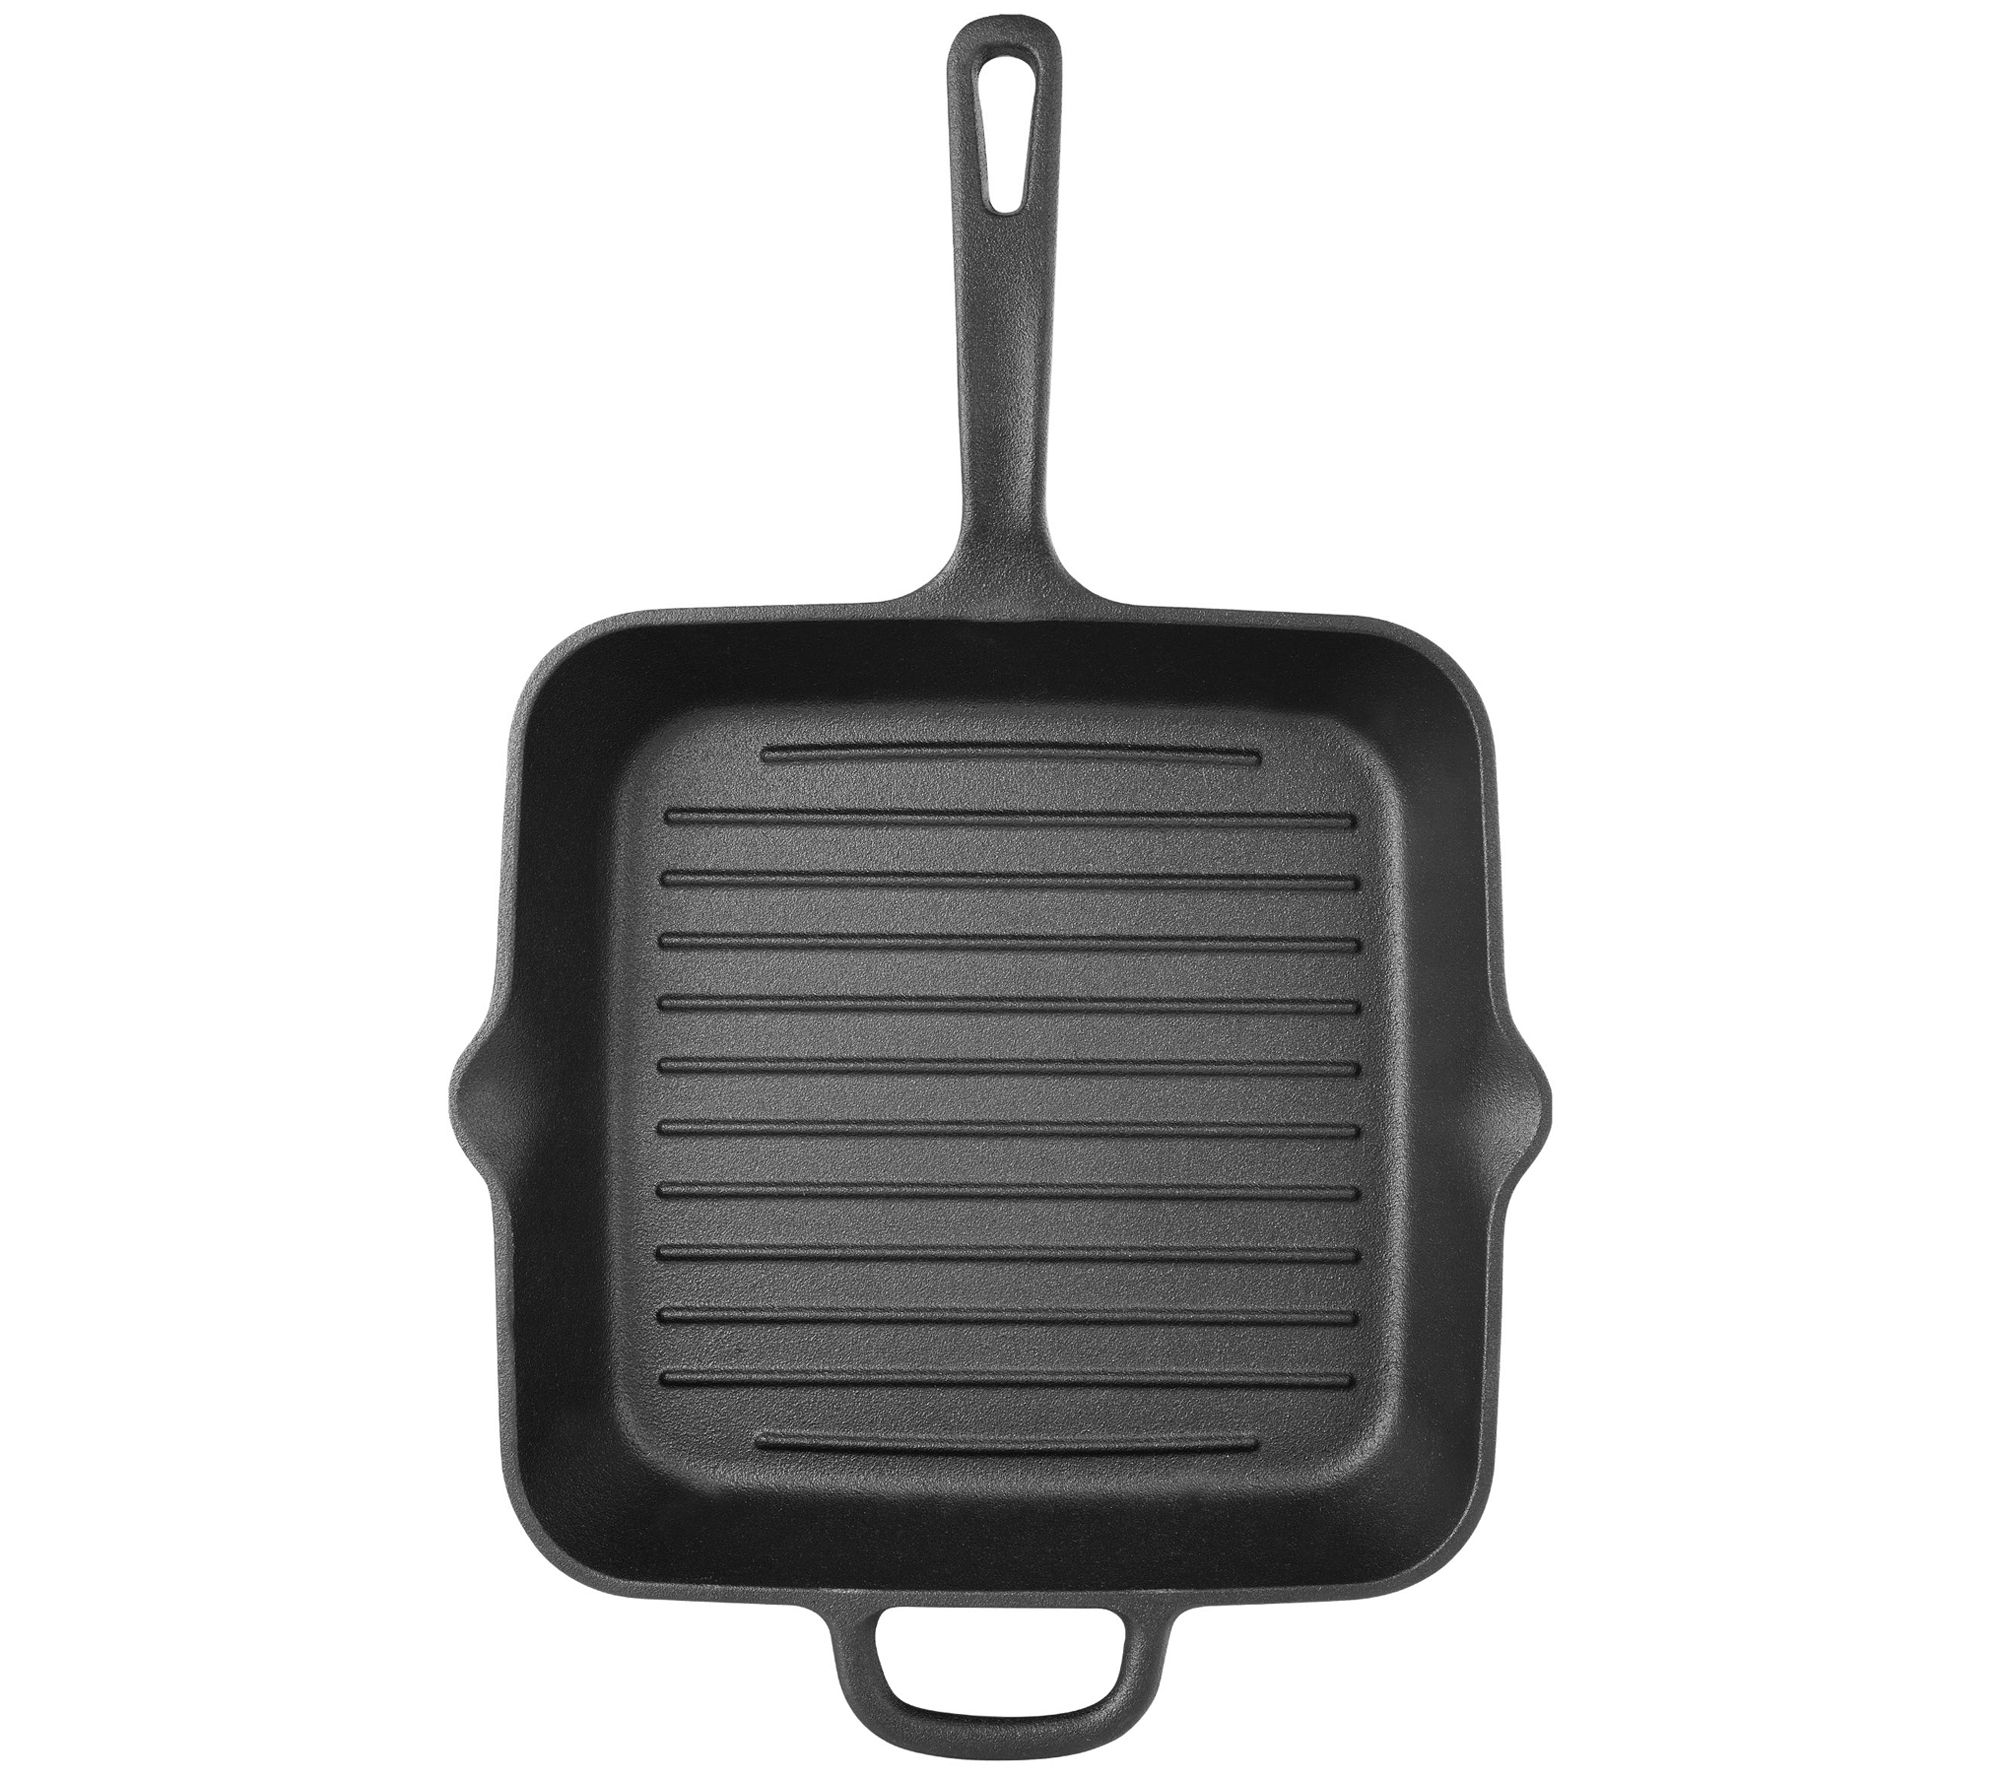 Le Creuset Enameled Cast Iron 10.25 Round Grill Pan on QVC 